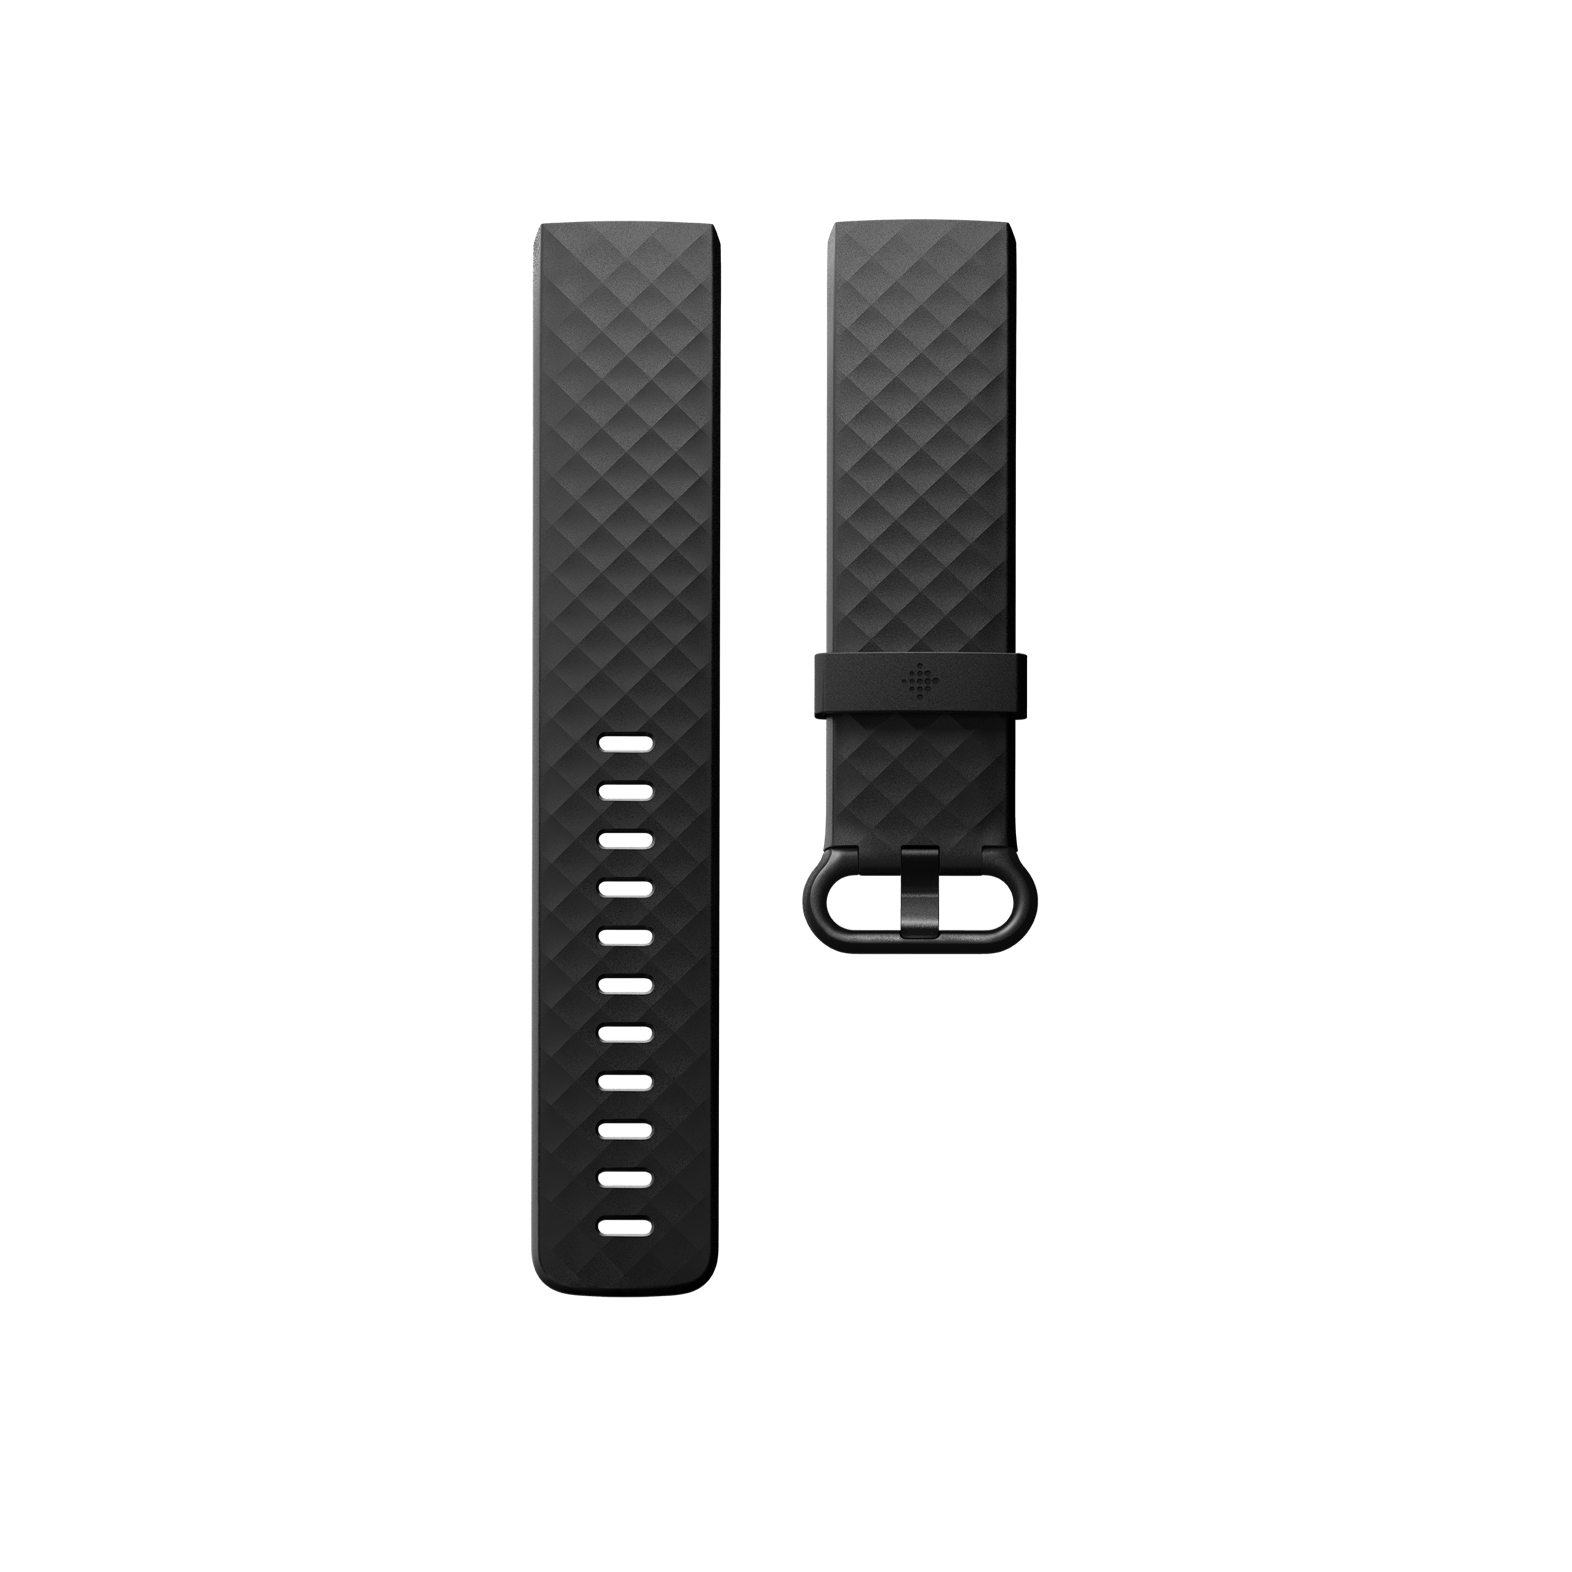 fitbit charge bands canada